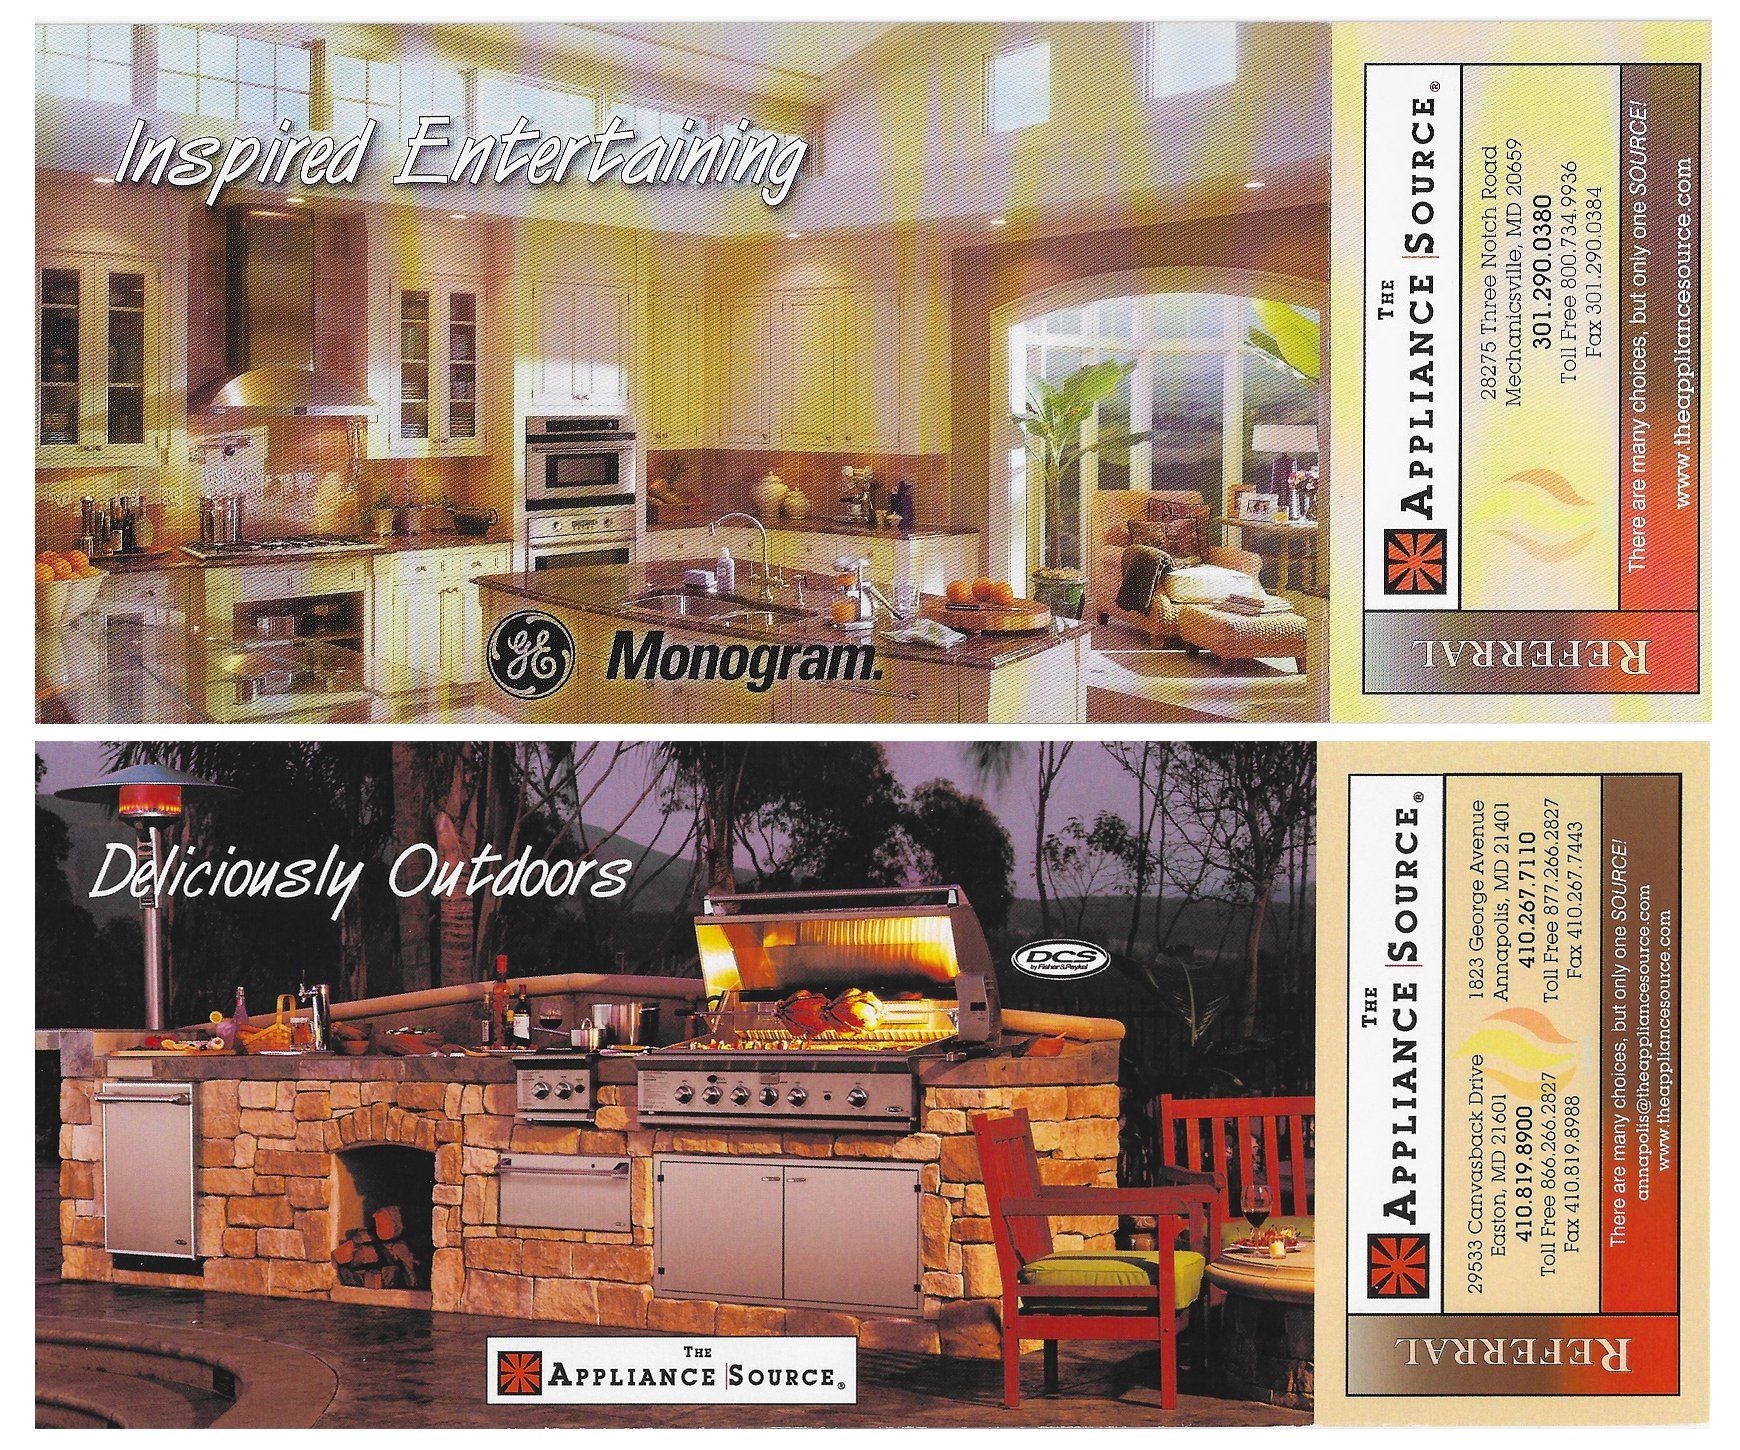 Two advertisements for appliance source and monogram